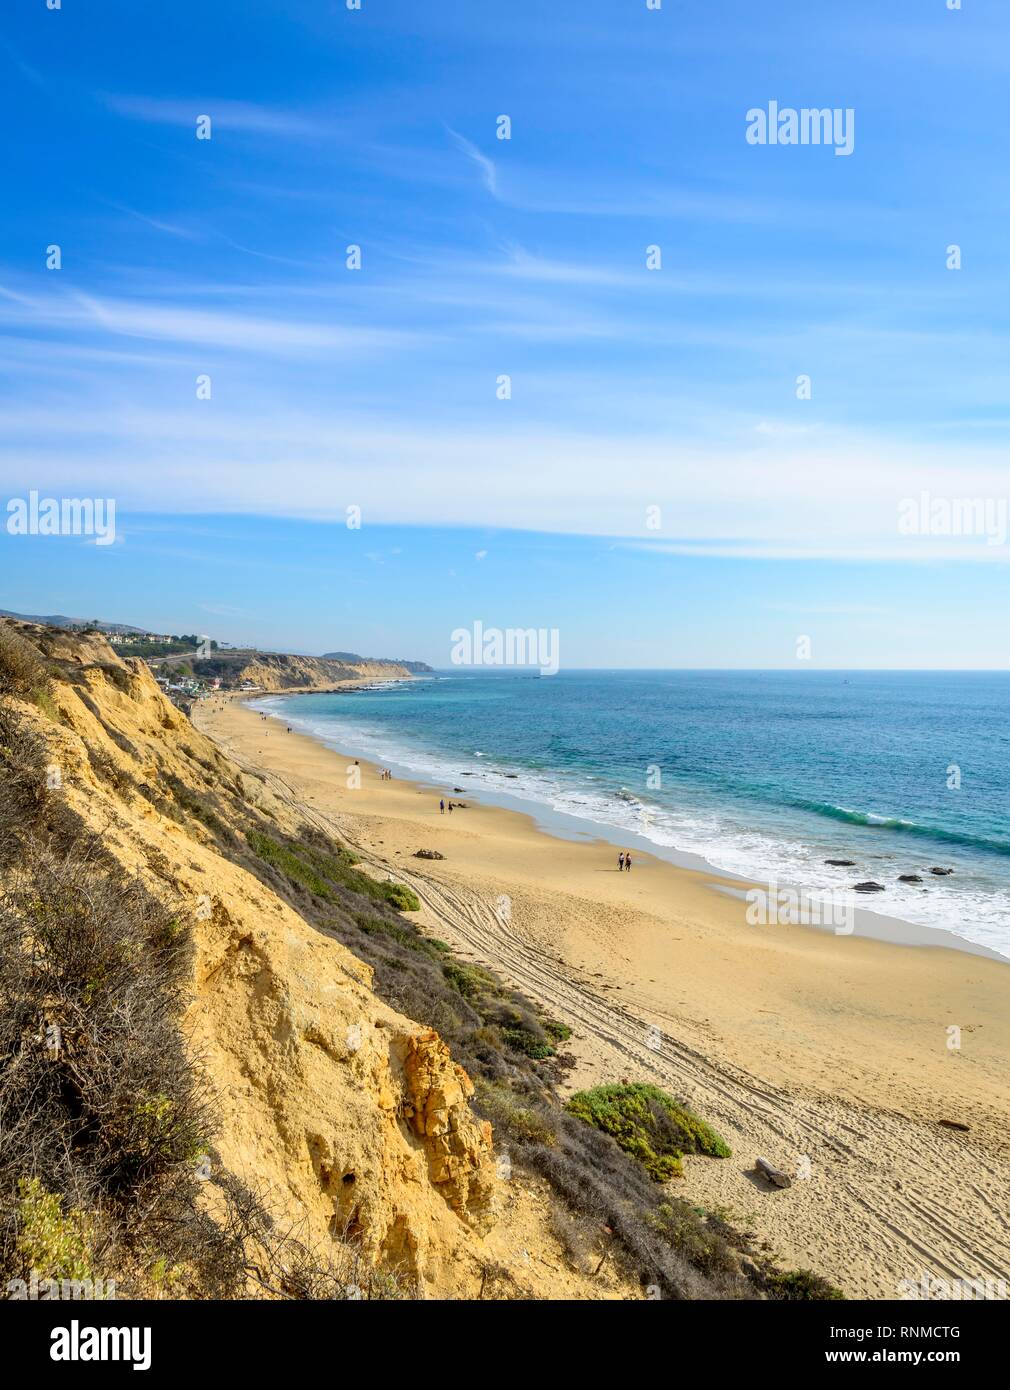 View of the sandy beach from Vista Point, Pelican Point, coastal reserve, Crystal Cove State Park, Orange County, California Stock Photo